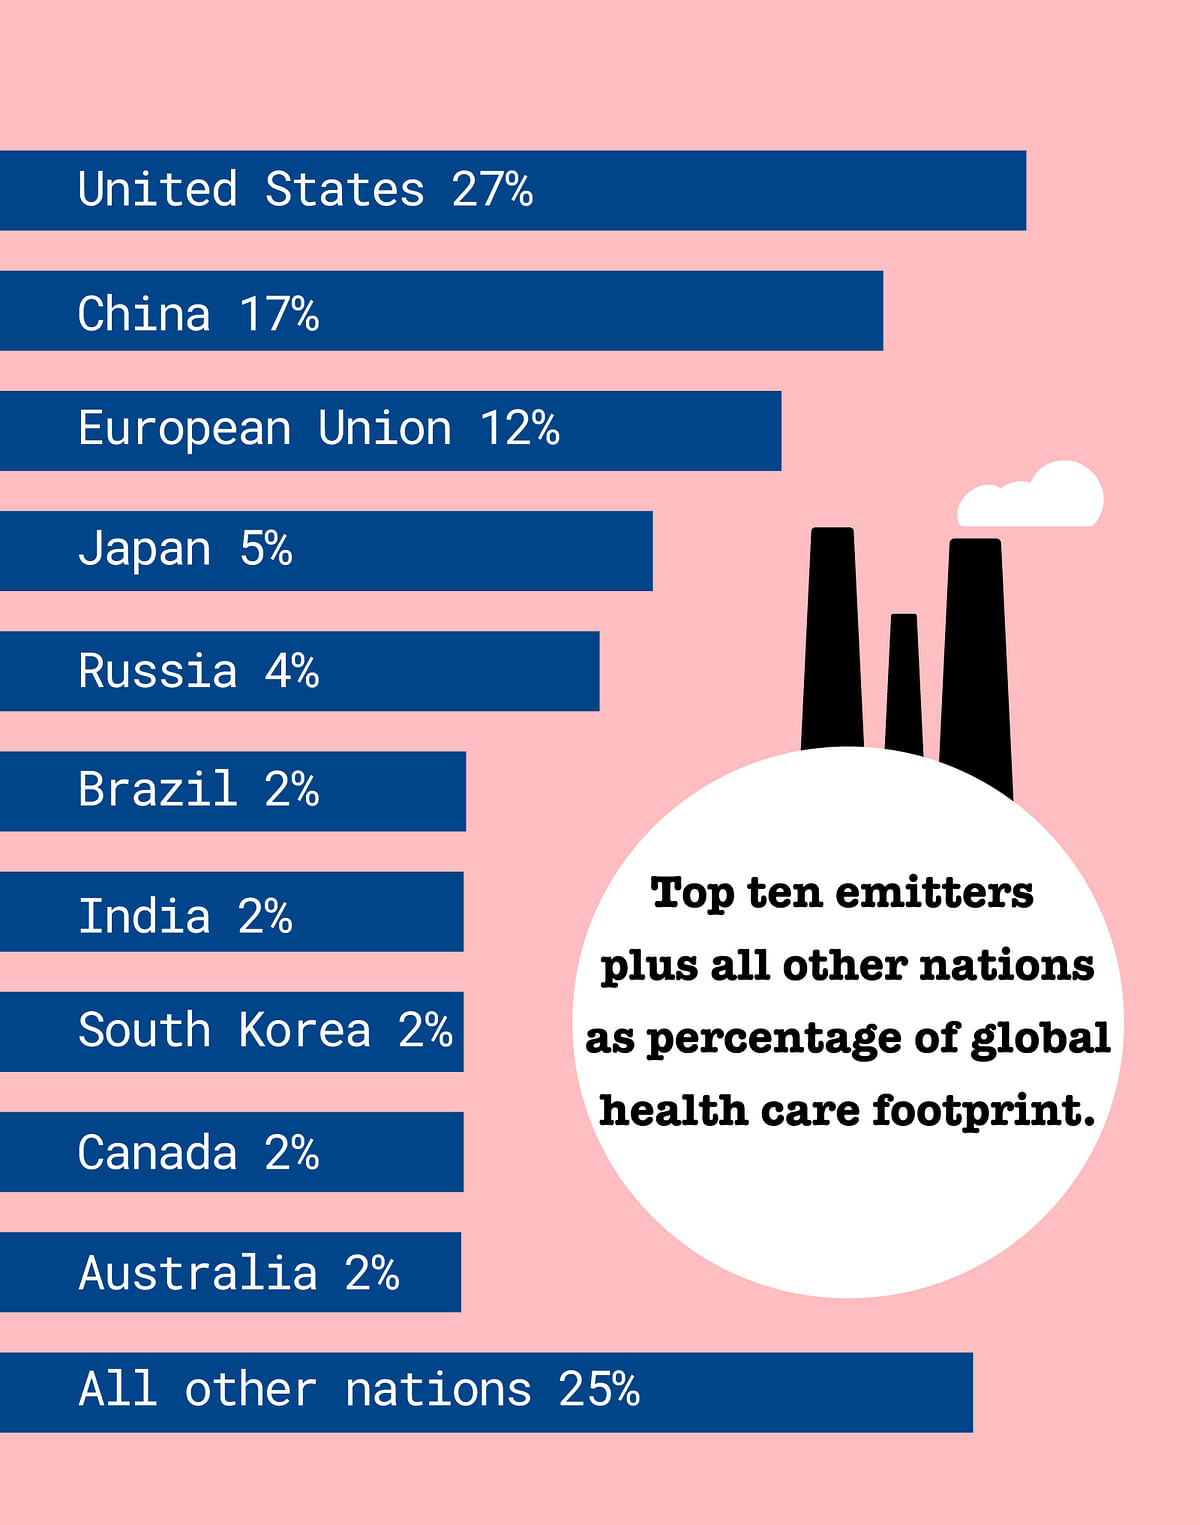 If the healthcare sector was a country, it would be the fifth biggest emitter of greenhouse gases in the world.